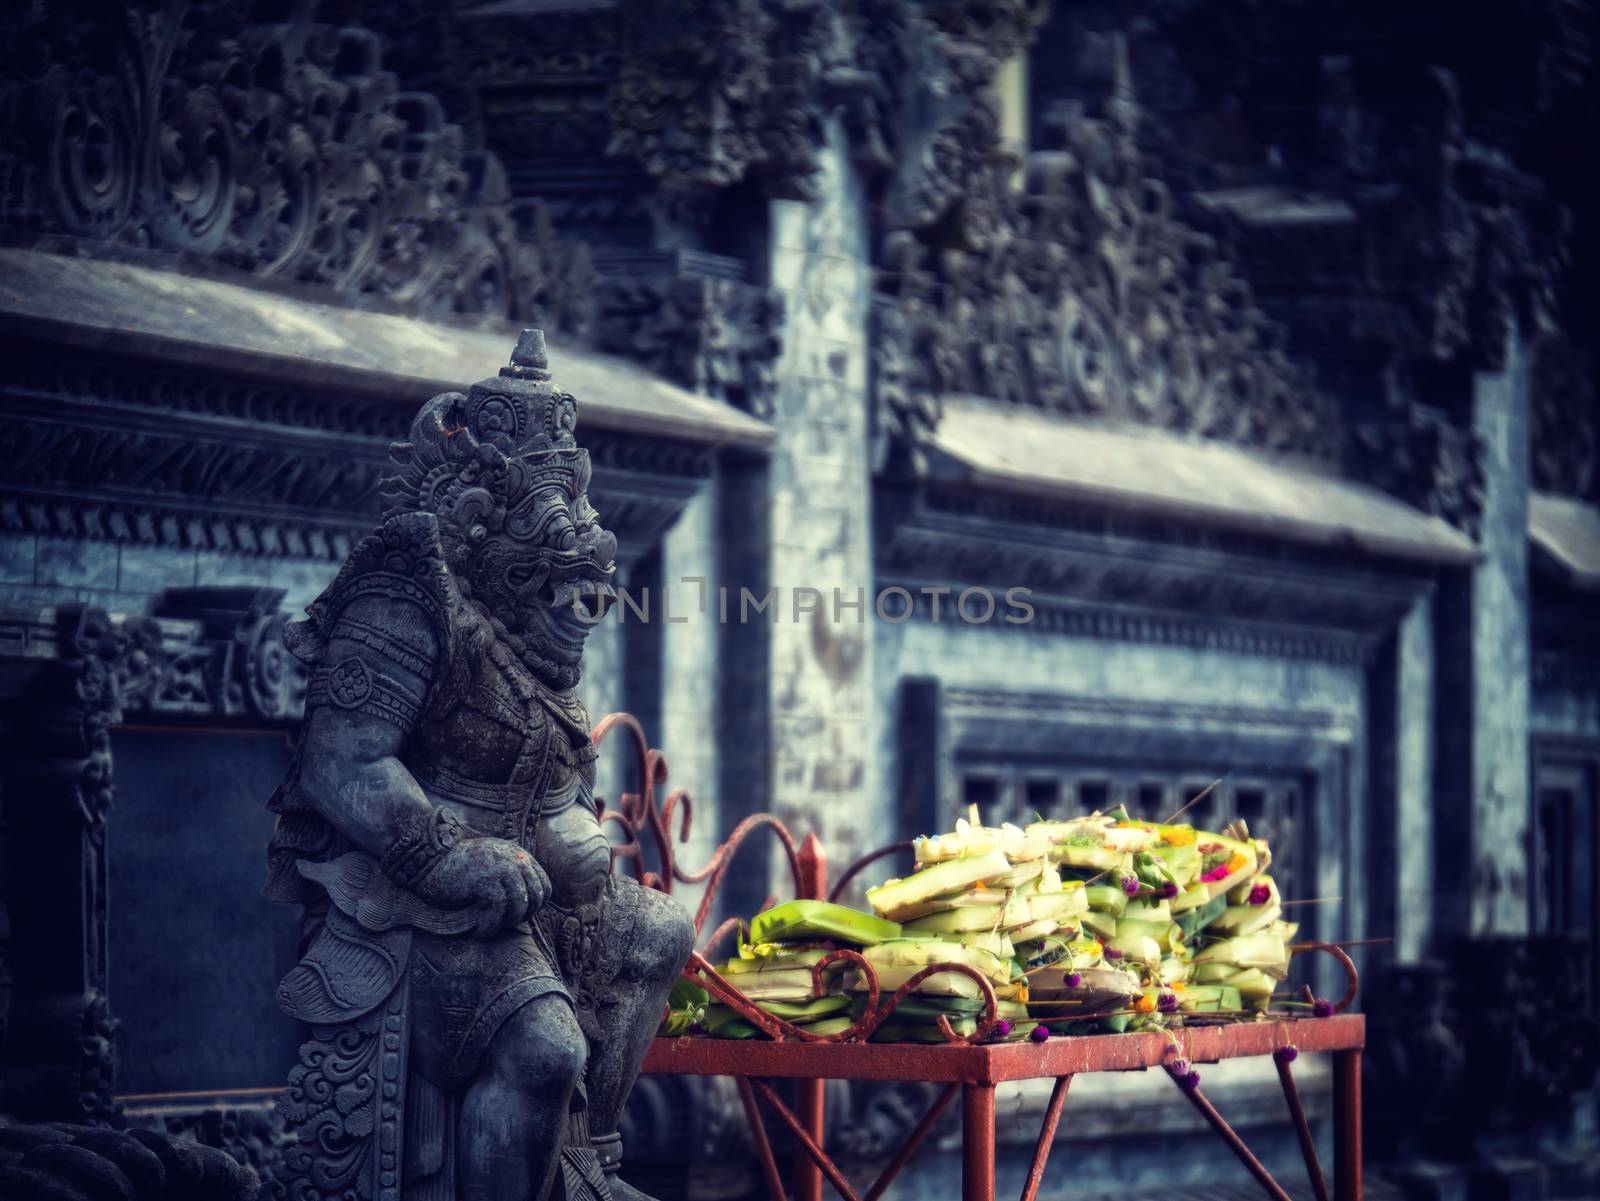 Gardian statue at the Bali temple entrance Indonesia